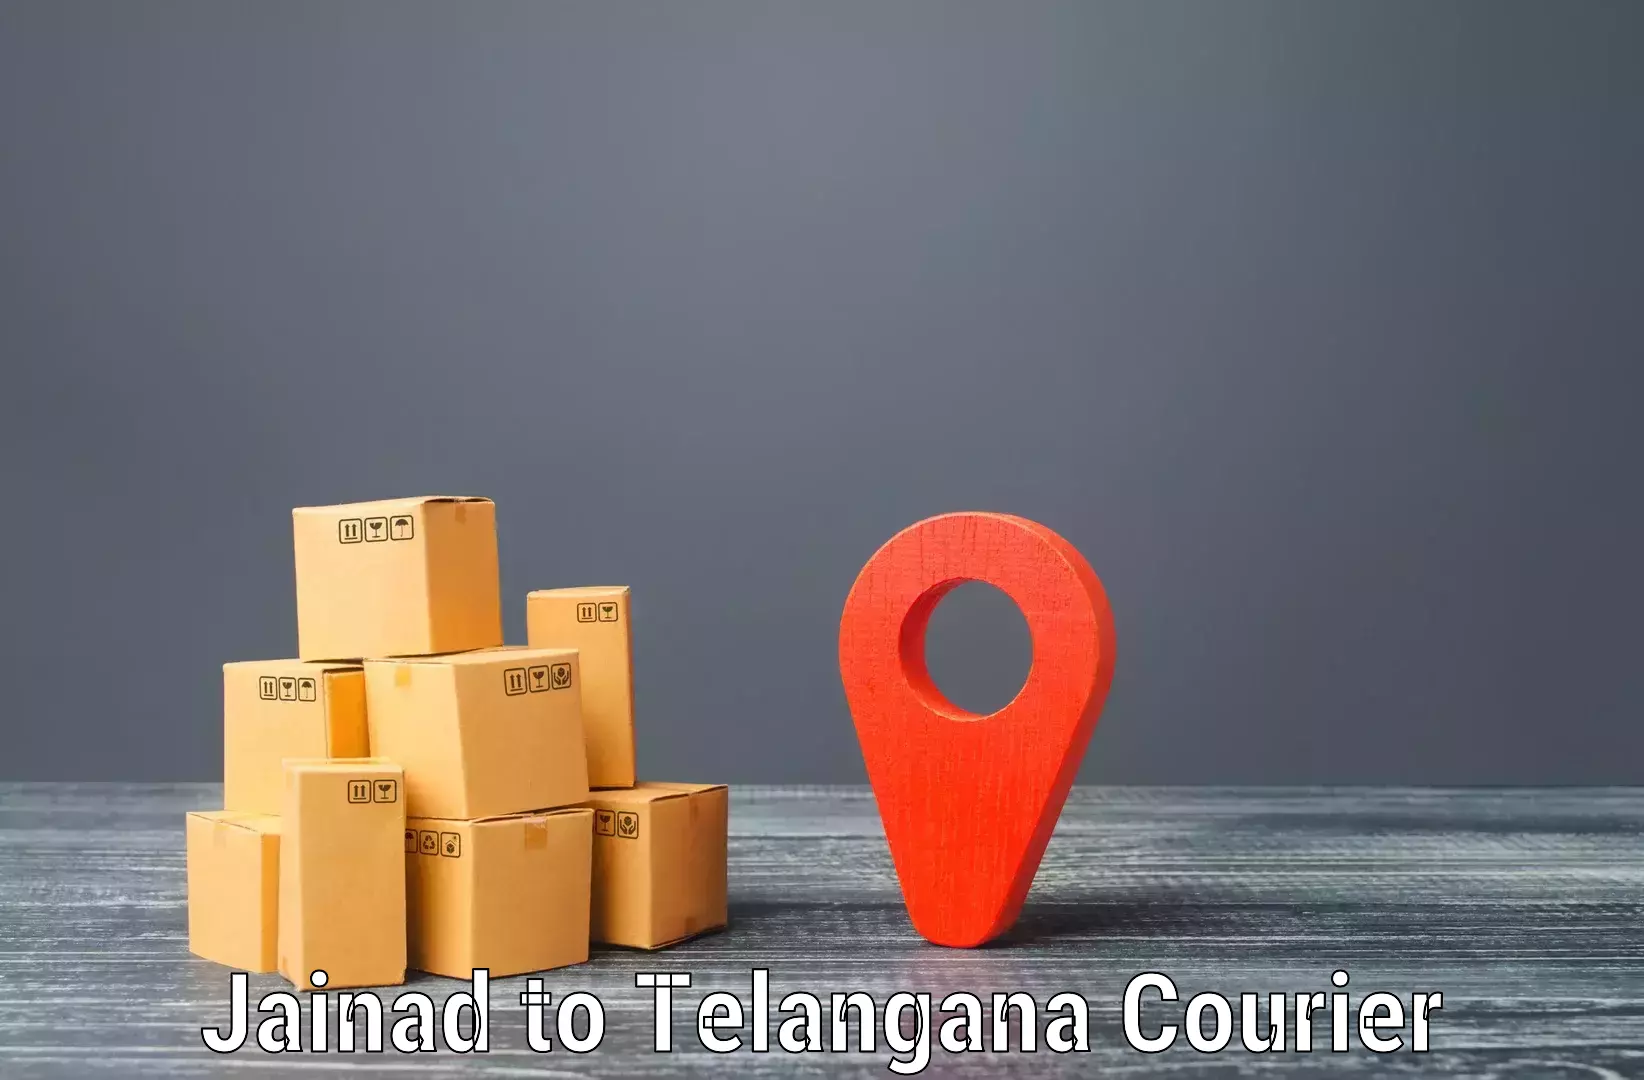 Rapid shipping services Jainad to Secunderabad